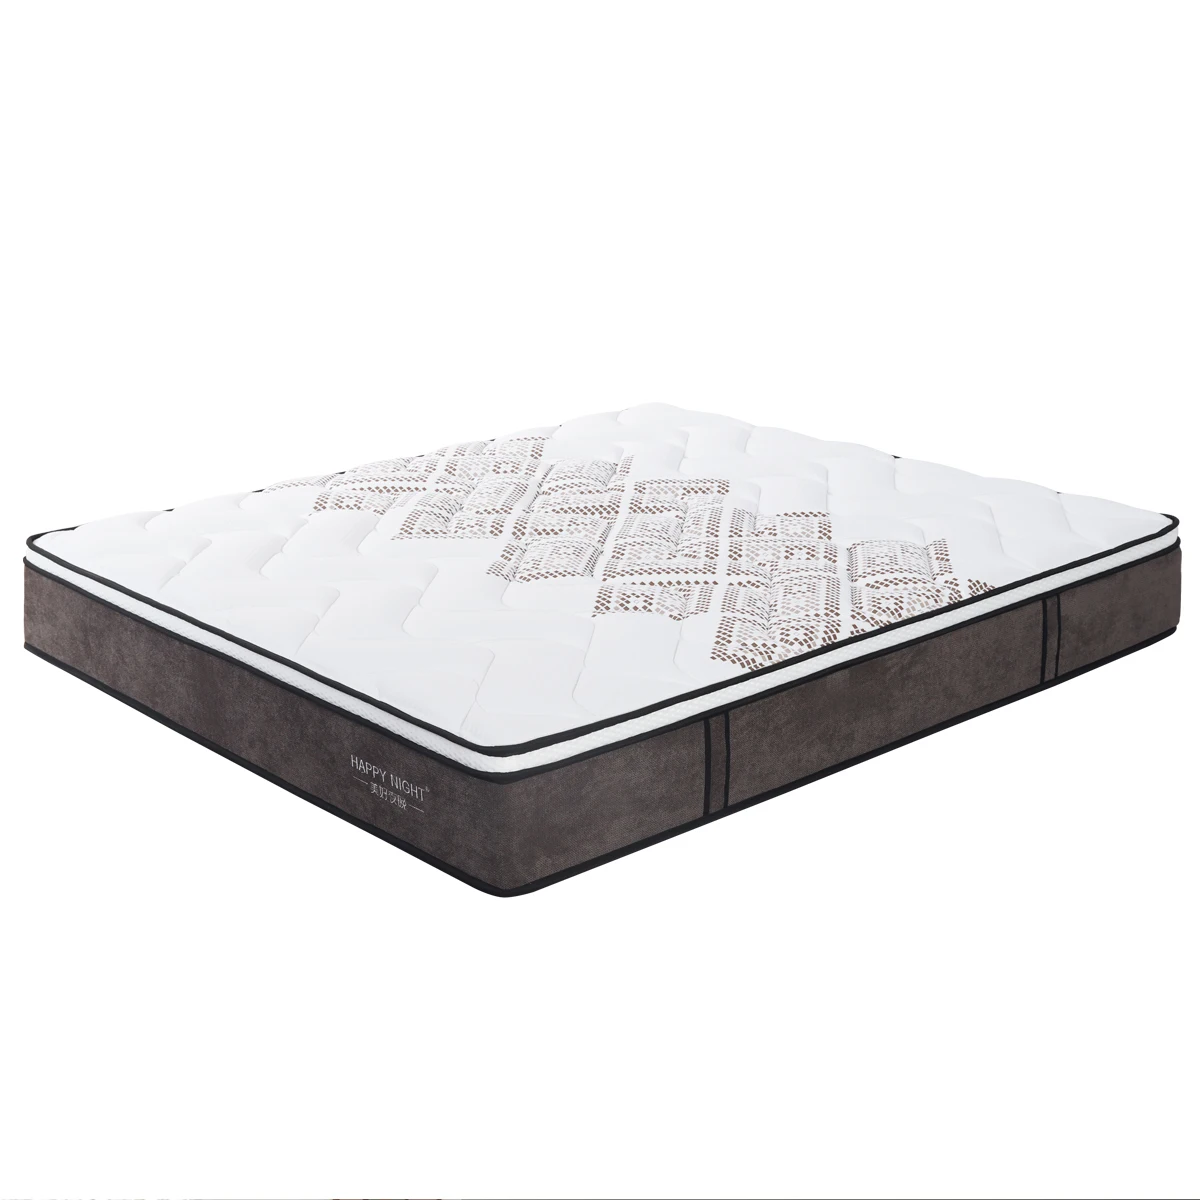 

Hypo-allergenic Luxury comfortable bed Independent Pocketed Spring mattress roll up memory foam mattresses for hotels